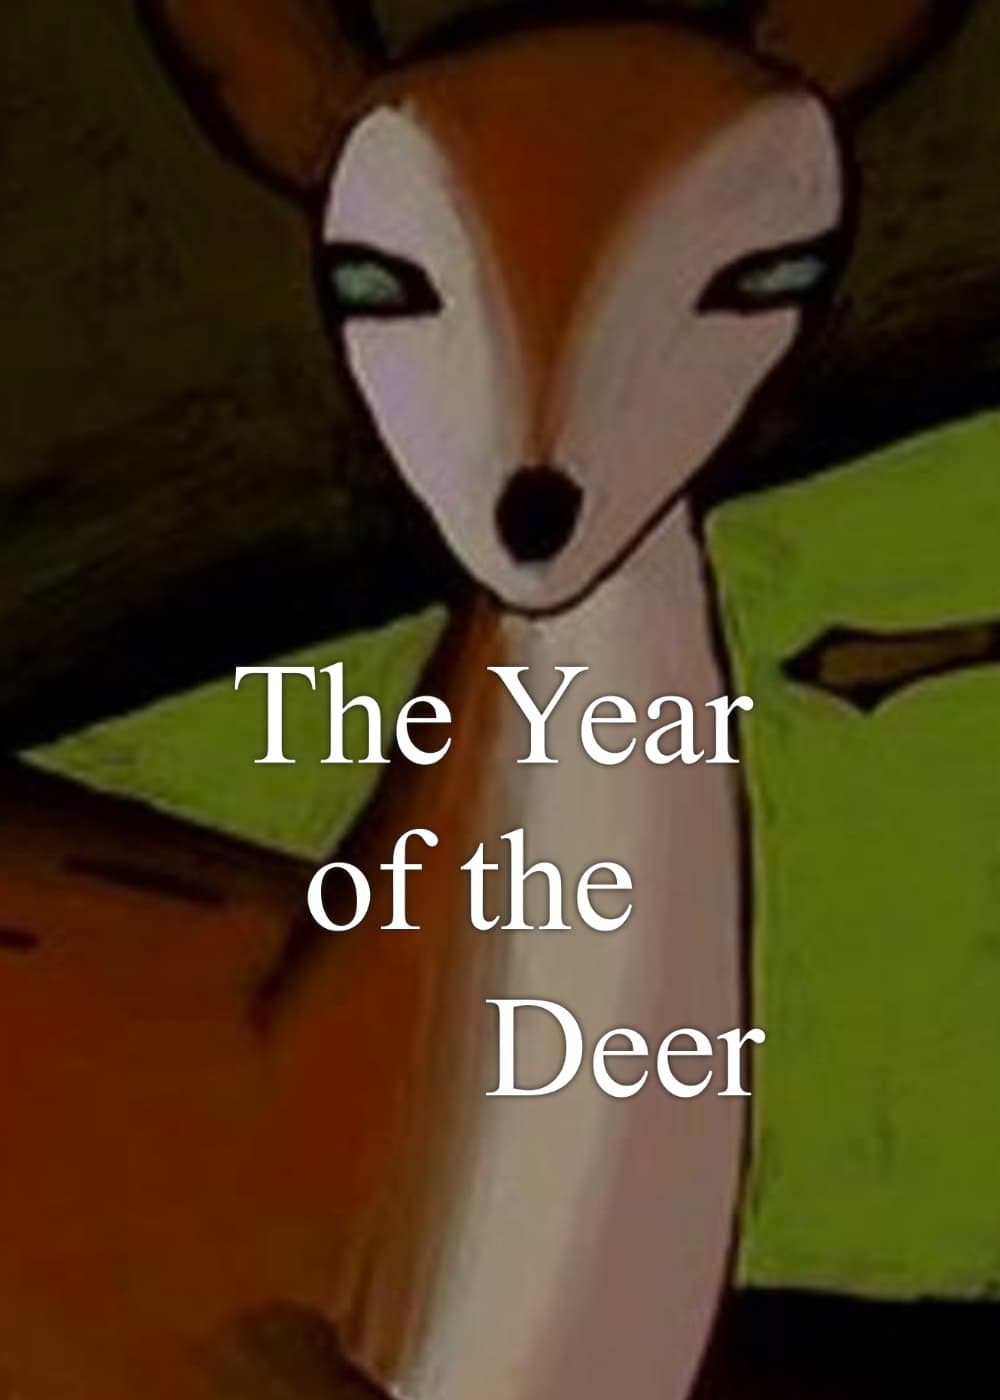 The Year of the Deer